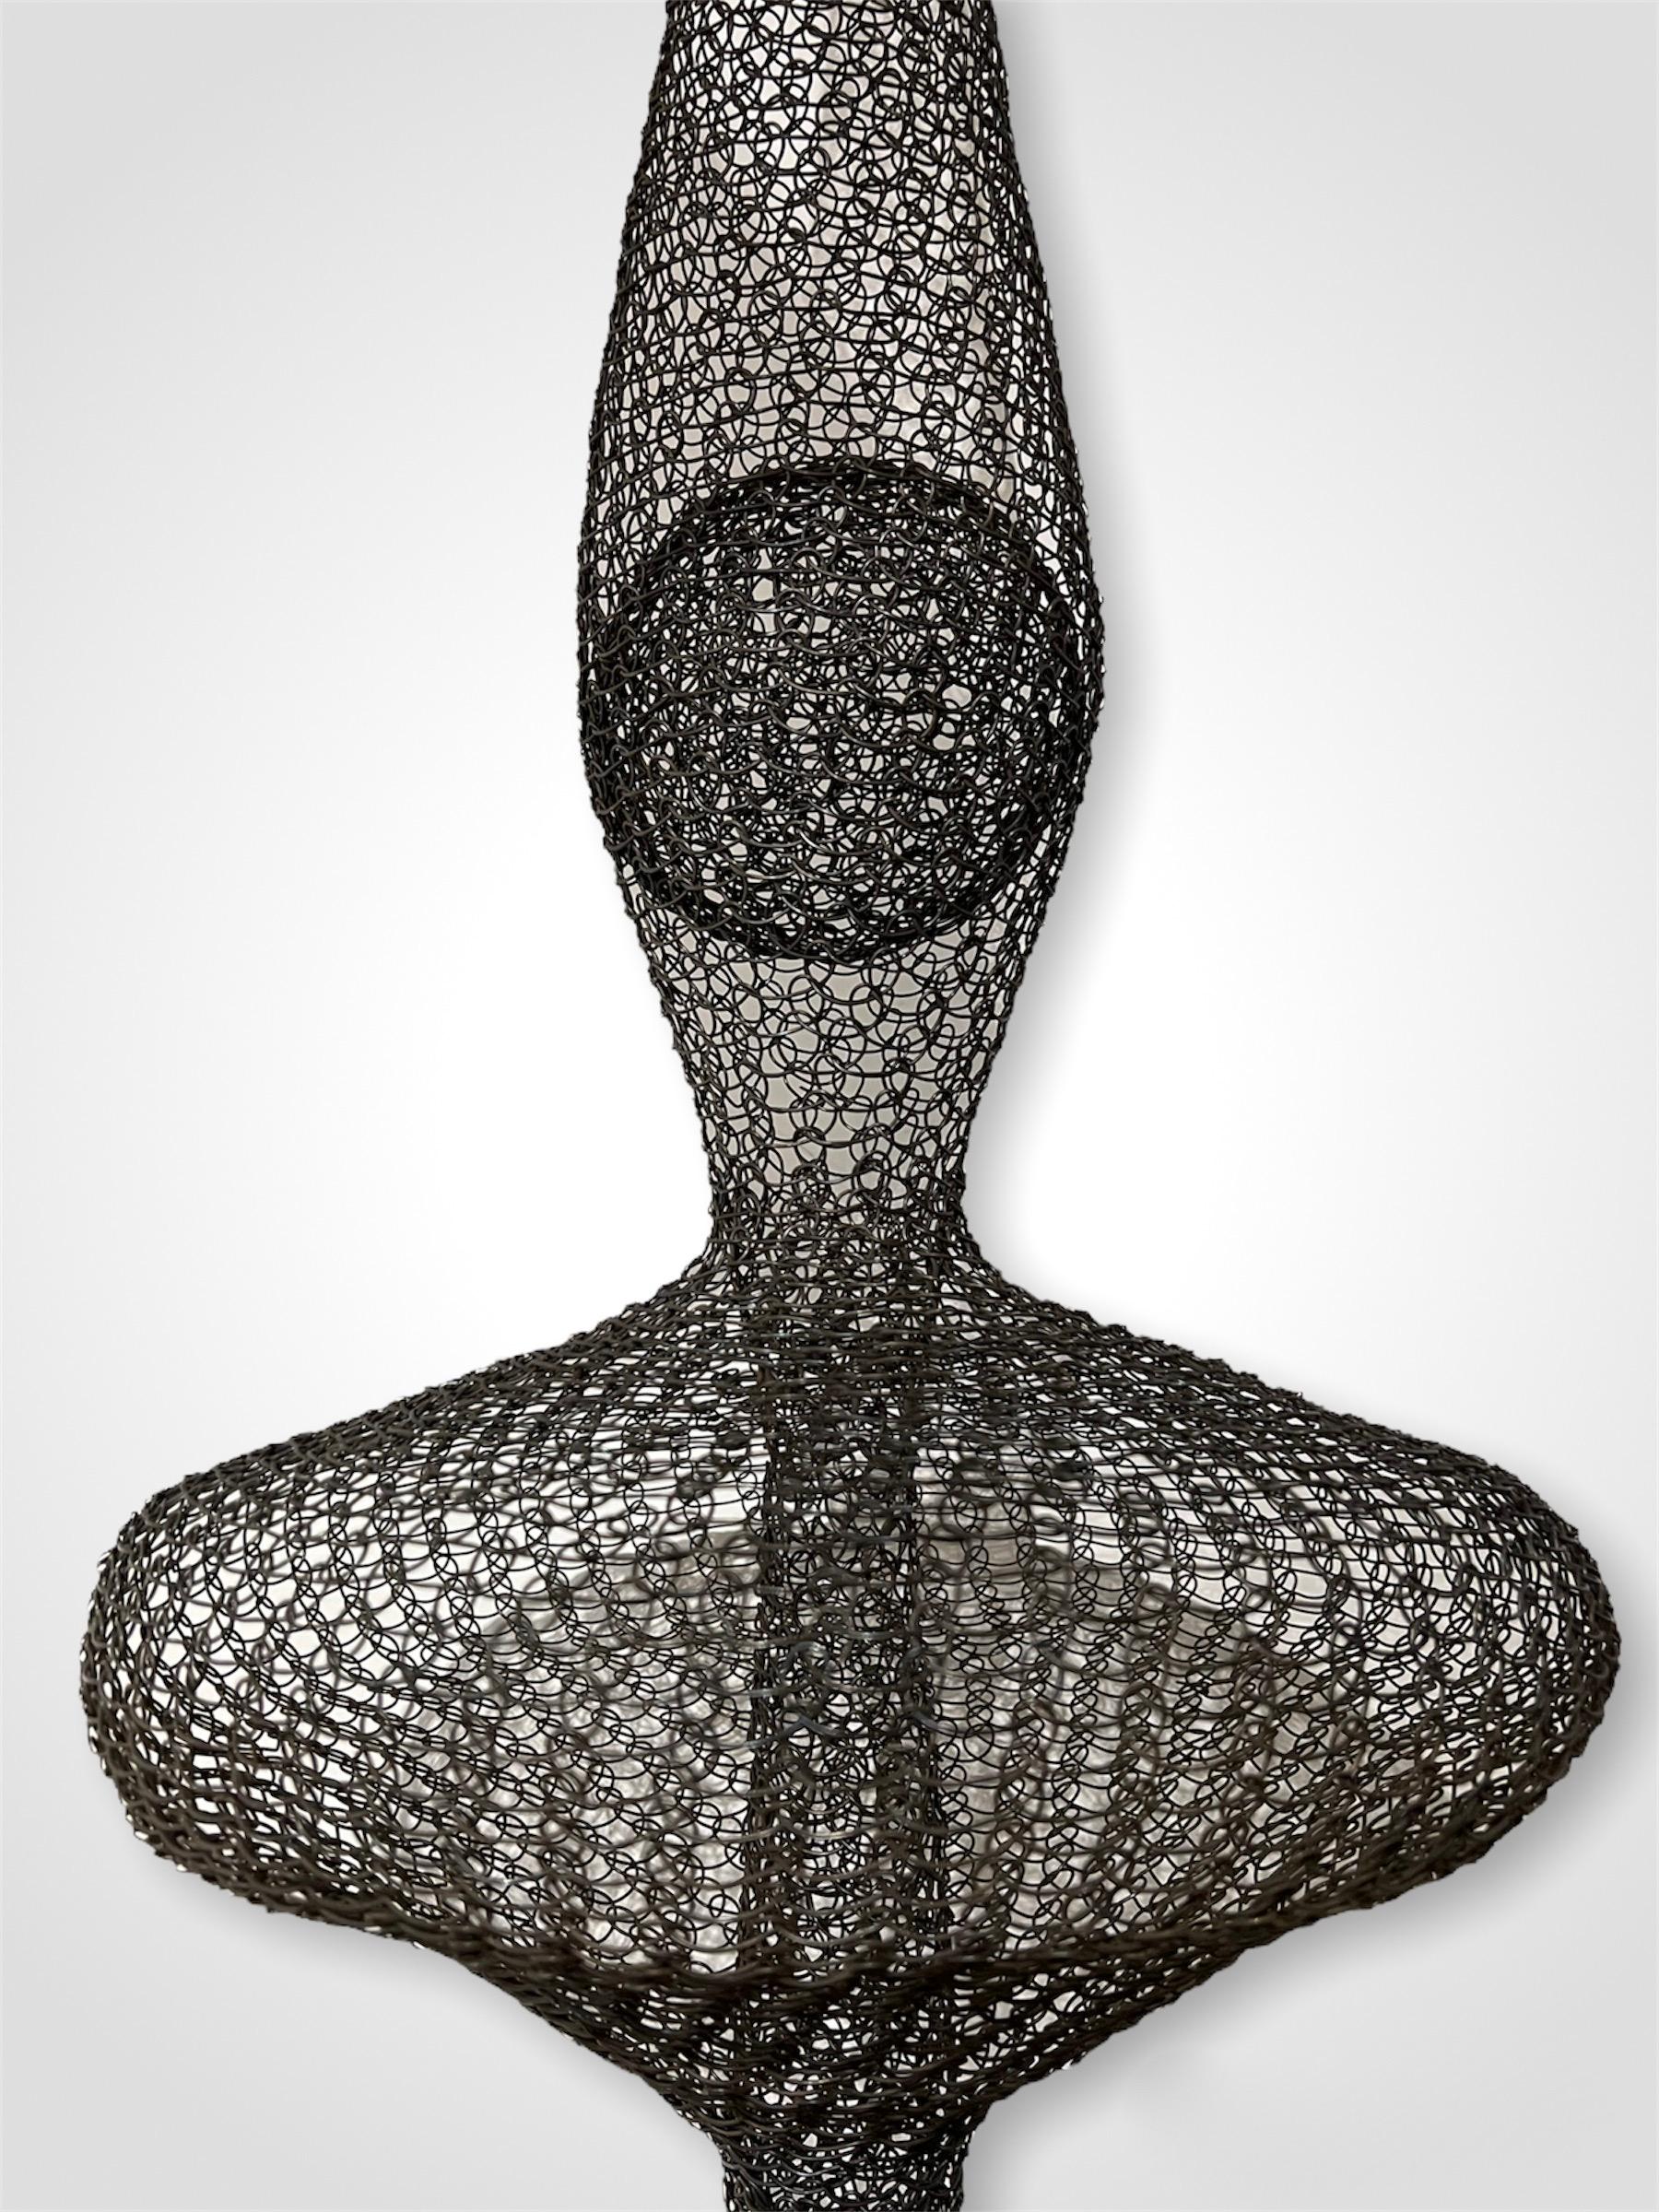 Hand-Woven Organic Woven Mesh Wire Sculpture by Ulrikk Dufosse For Sale